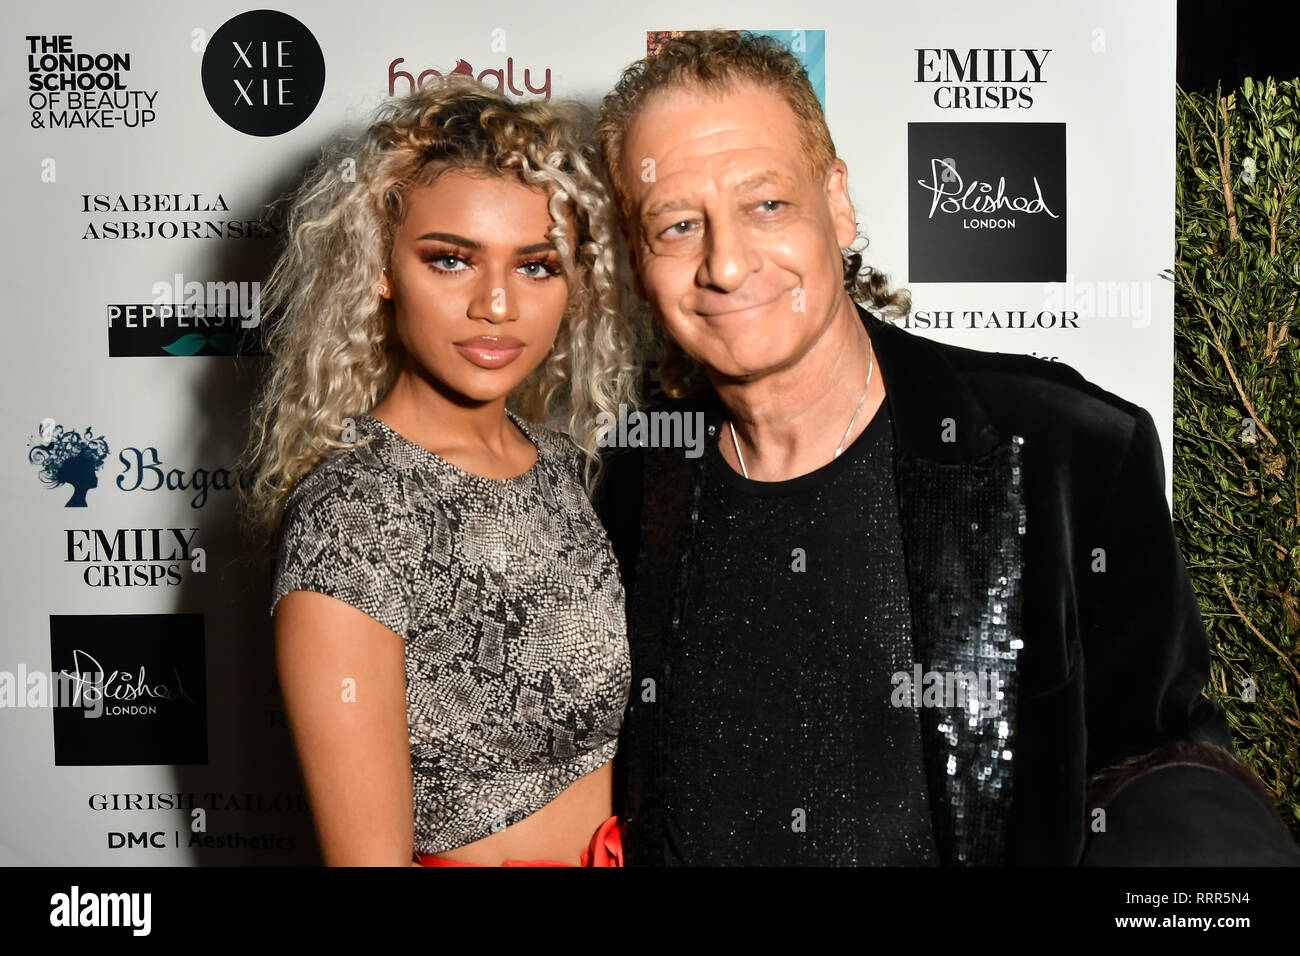 London, UK. 26th Feb 2019. Mia Rothwell and Alan Enfield Arrivers at Nina Naustdal catwalk show SS19/20 collection by The London School of Beauty & Make-up at Bagatelle on 26 Feb 2019, London, UK. Credit: Picture Capital/Alamy Live News Stock Photo